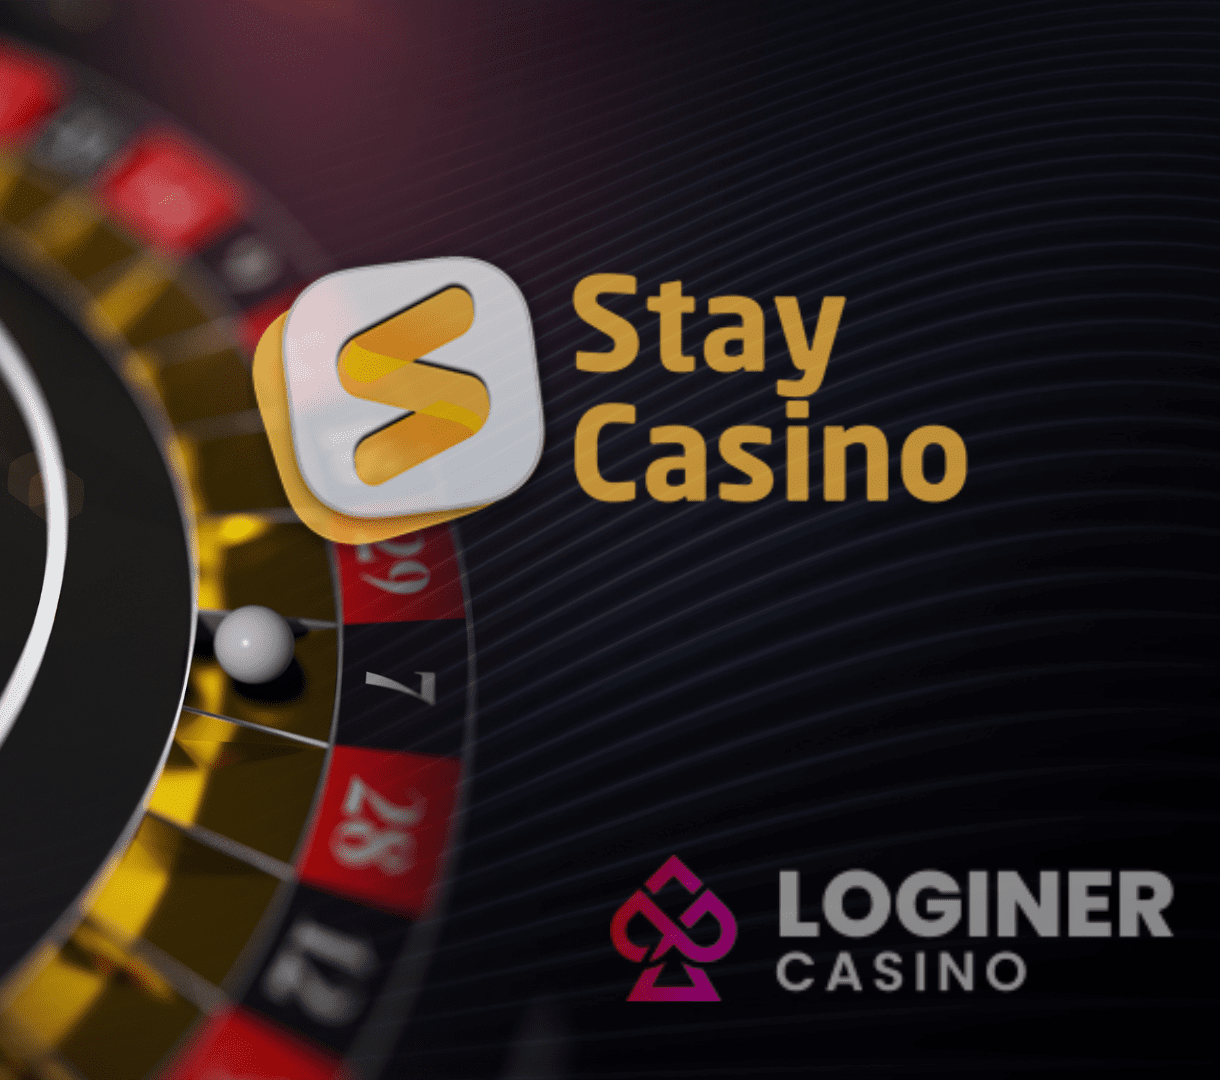 The lowest deposit amount allowed is $5. Online gambling bonuses stay casino